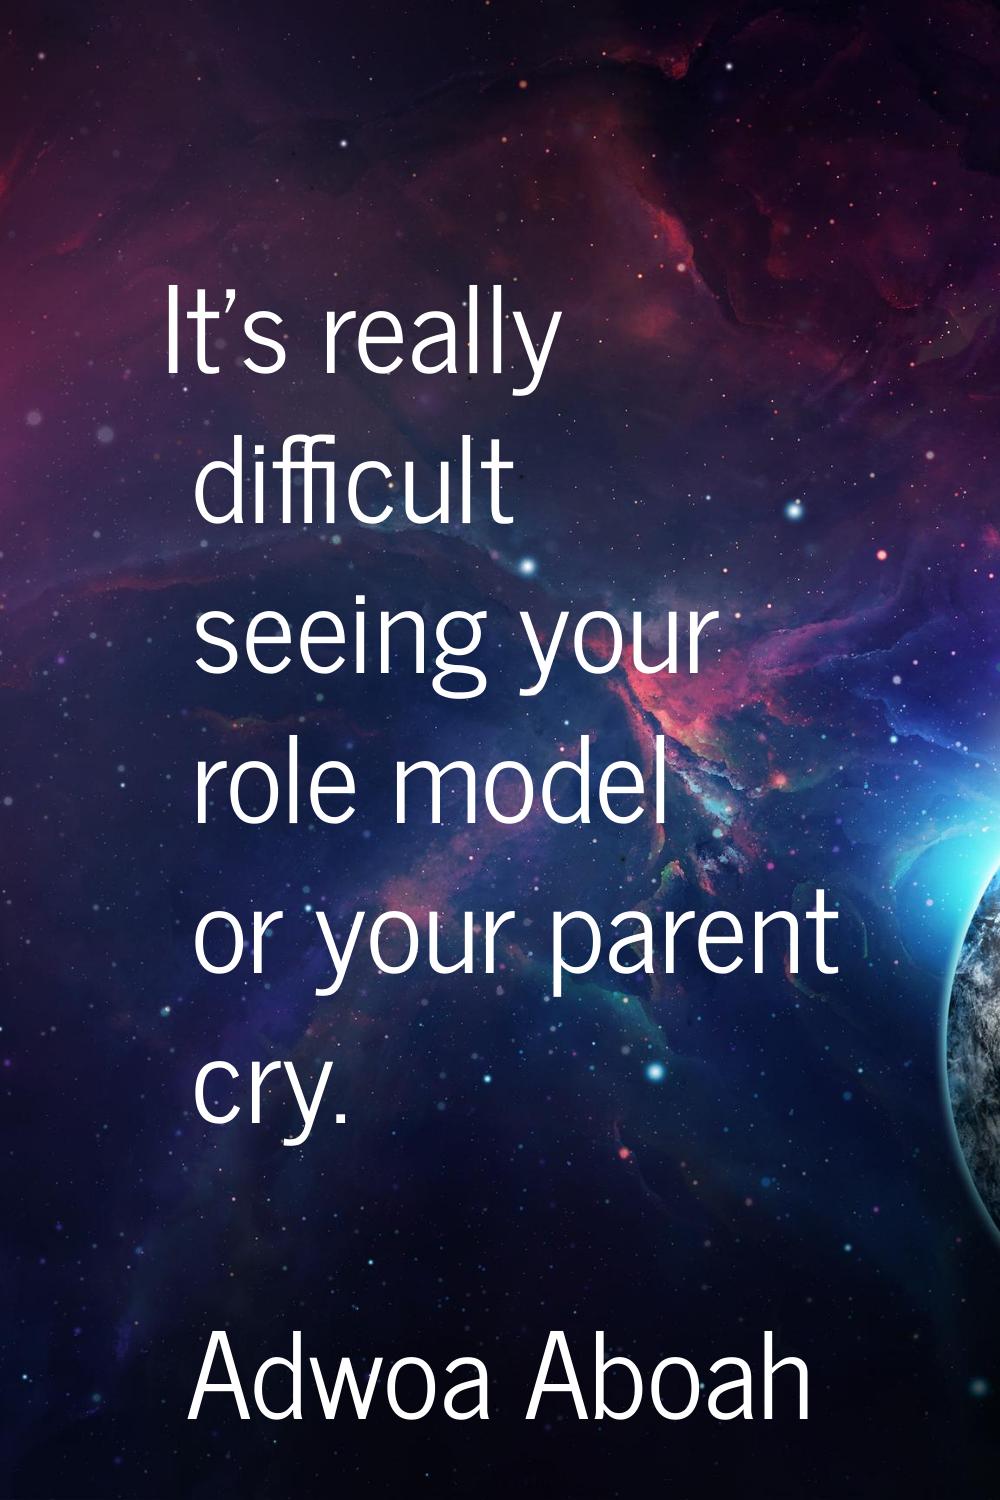 It's really difficult seeing your role model or your parent cry.